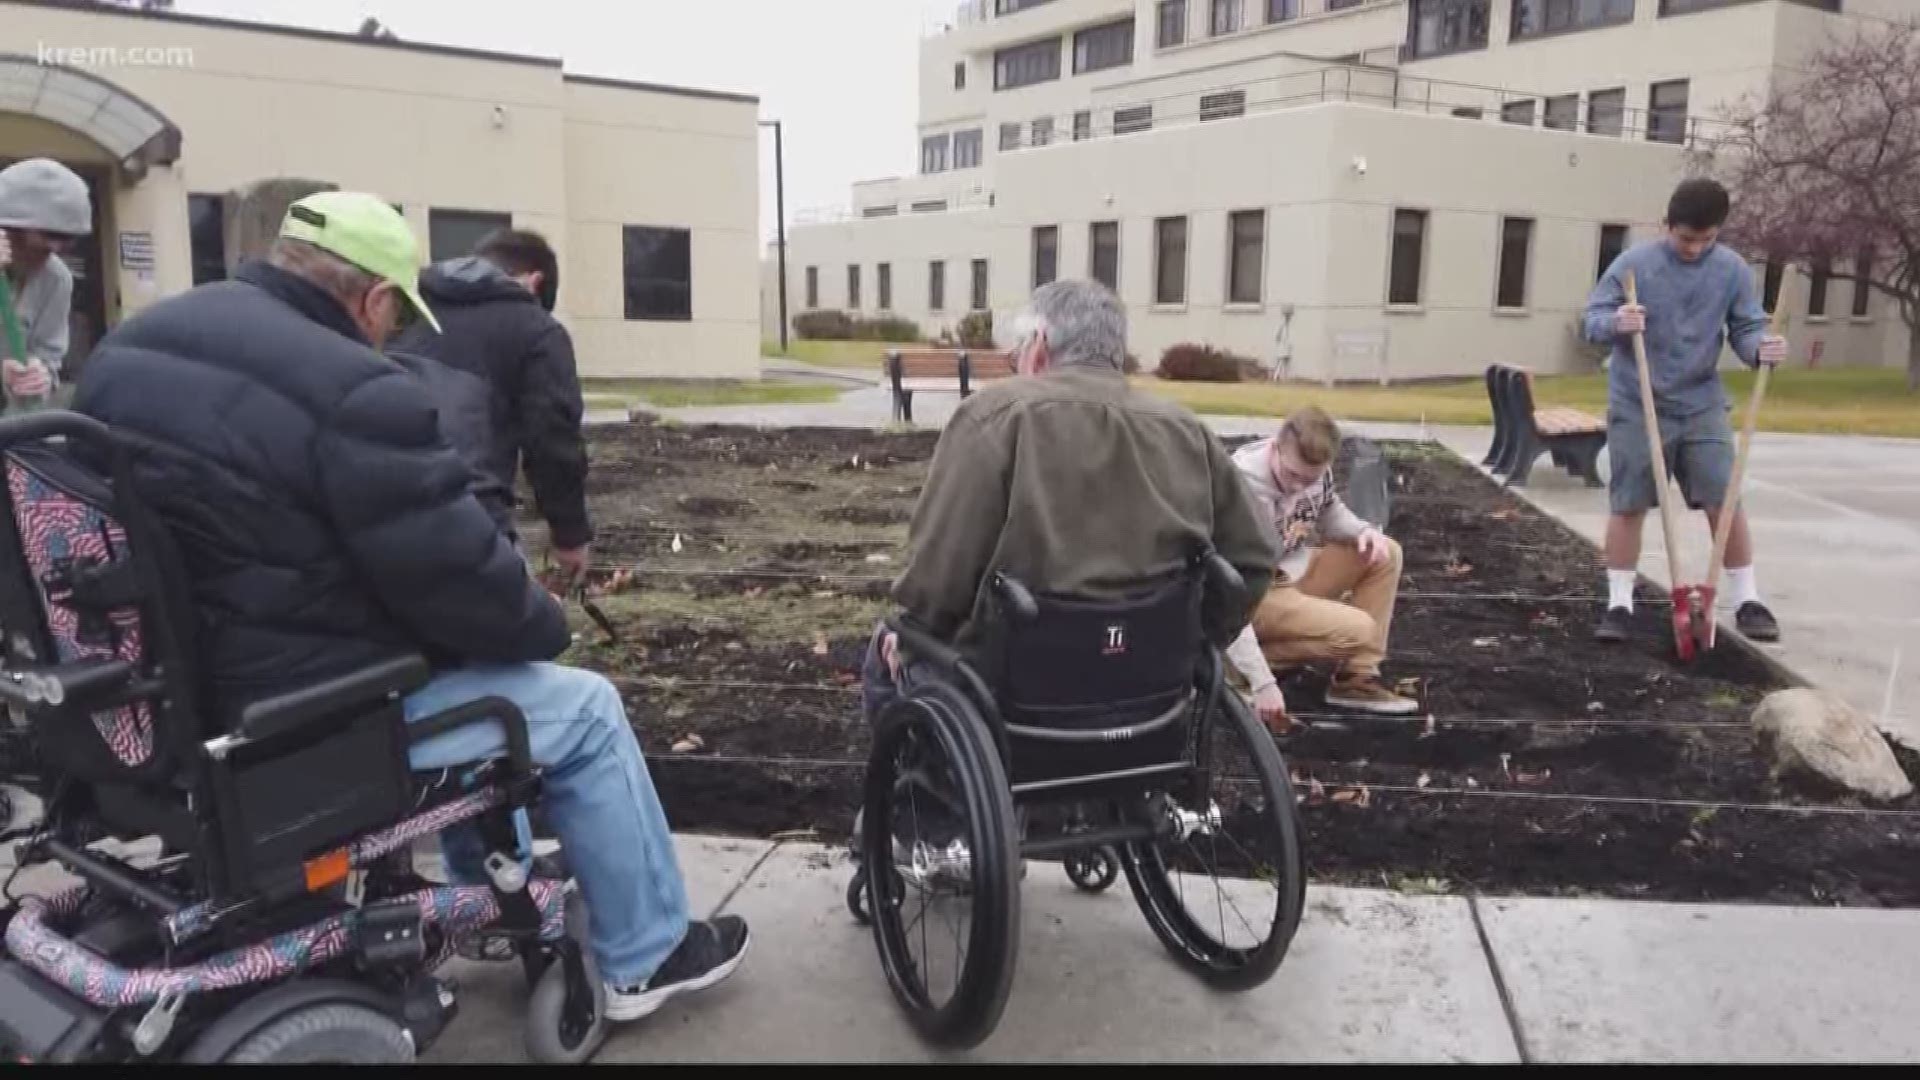 Disabled vets were up early Sunday morning planting tulips that bloom each spring.